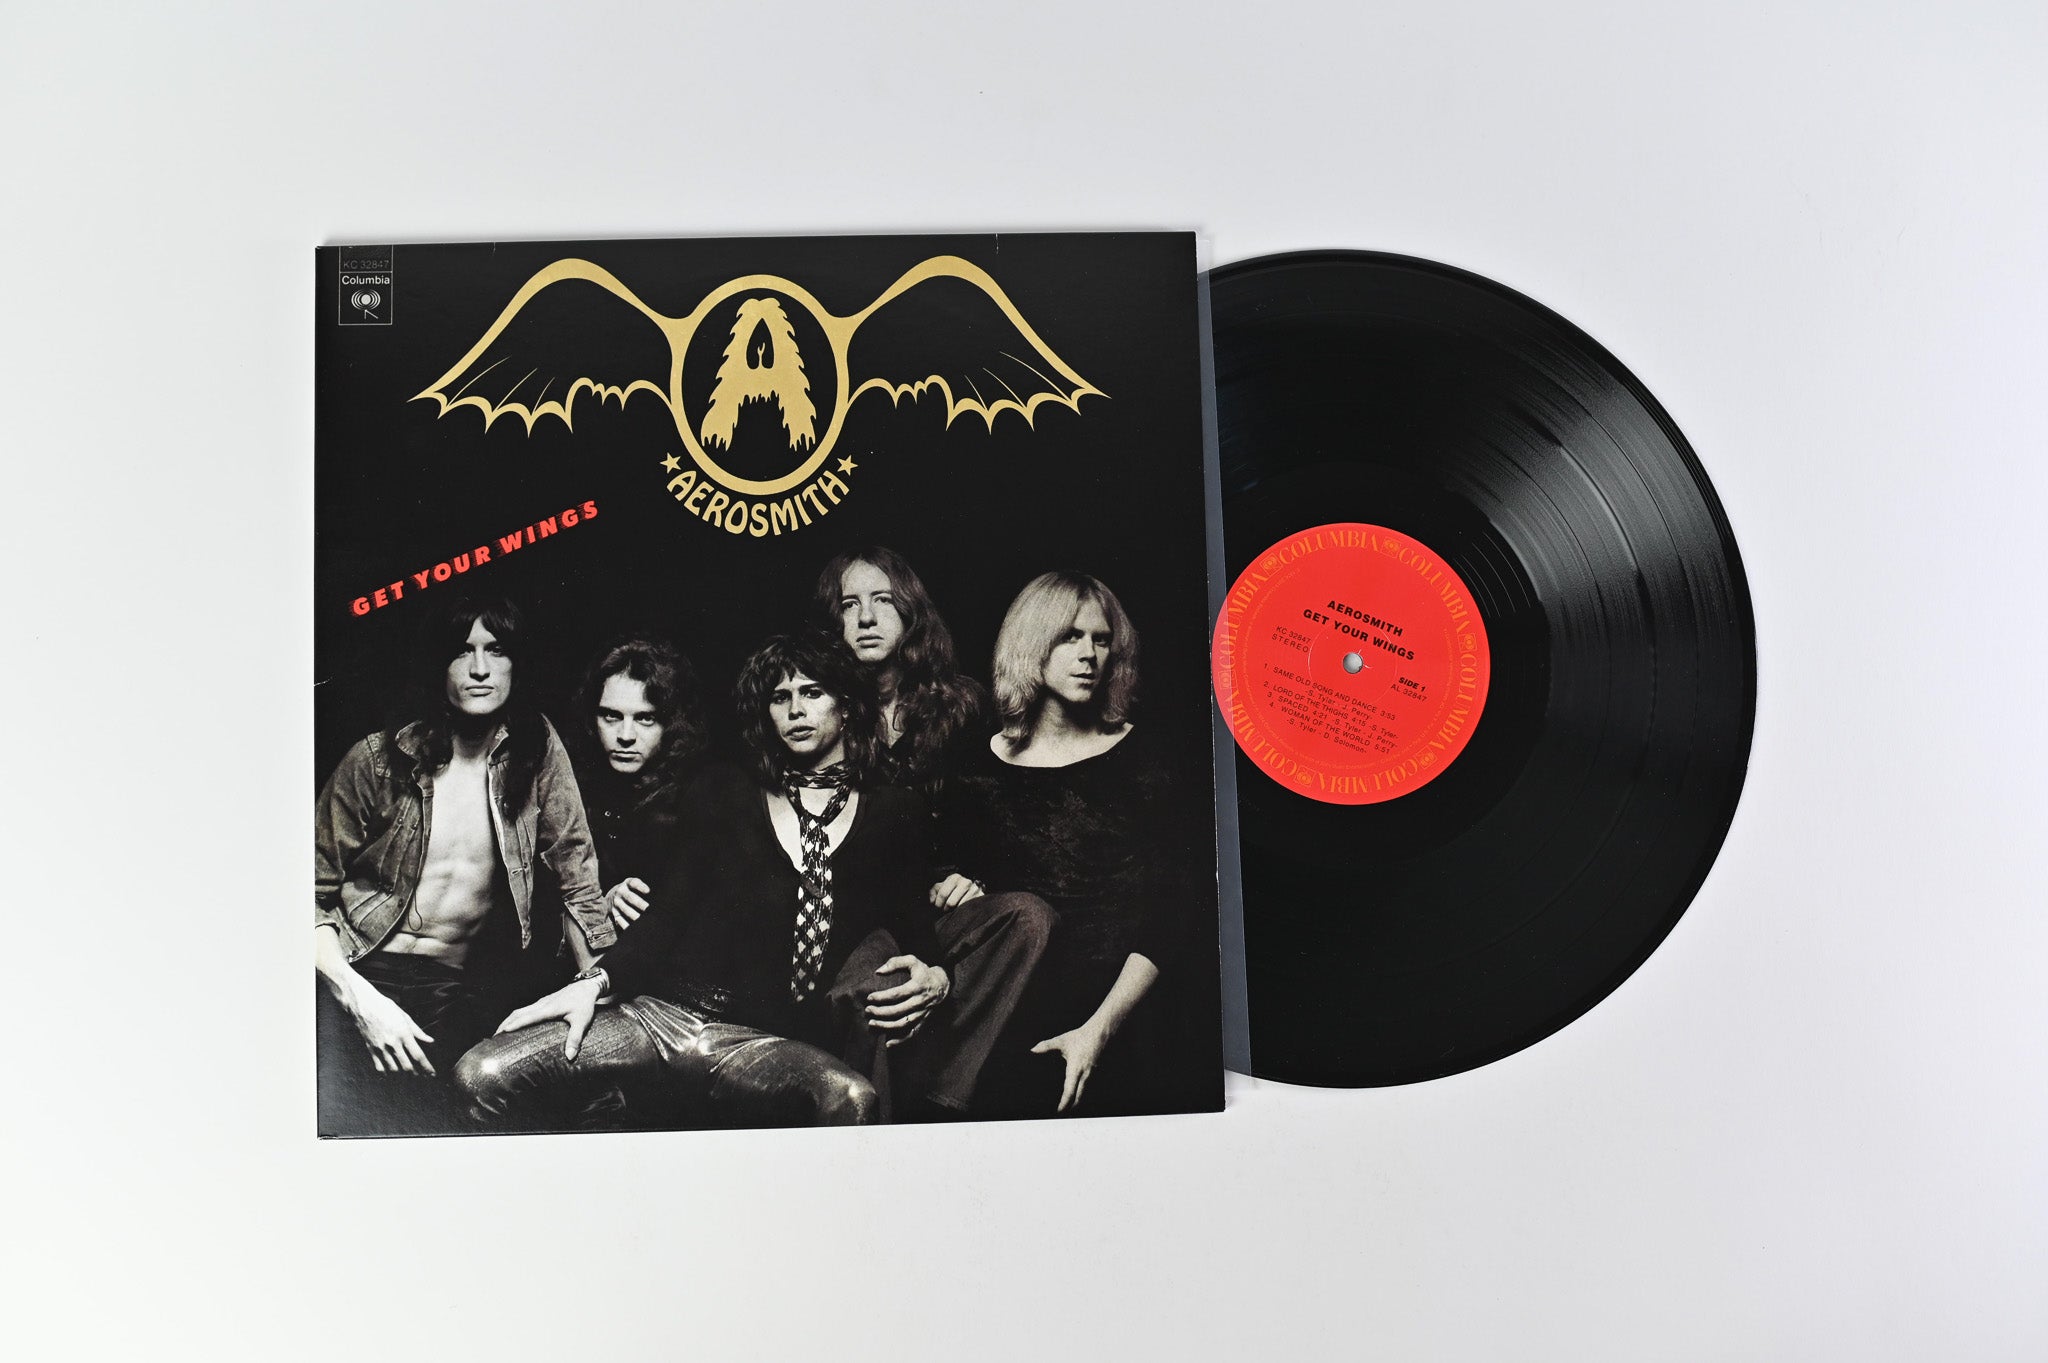 Aerosmith - Get Your Wings on Columbia 180 Gram Reissue